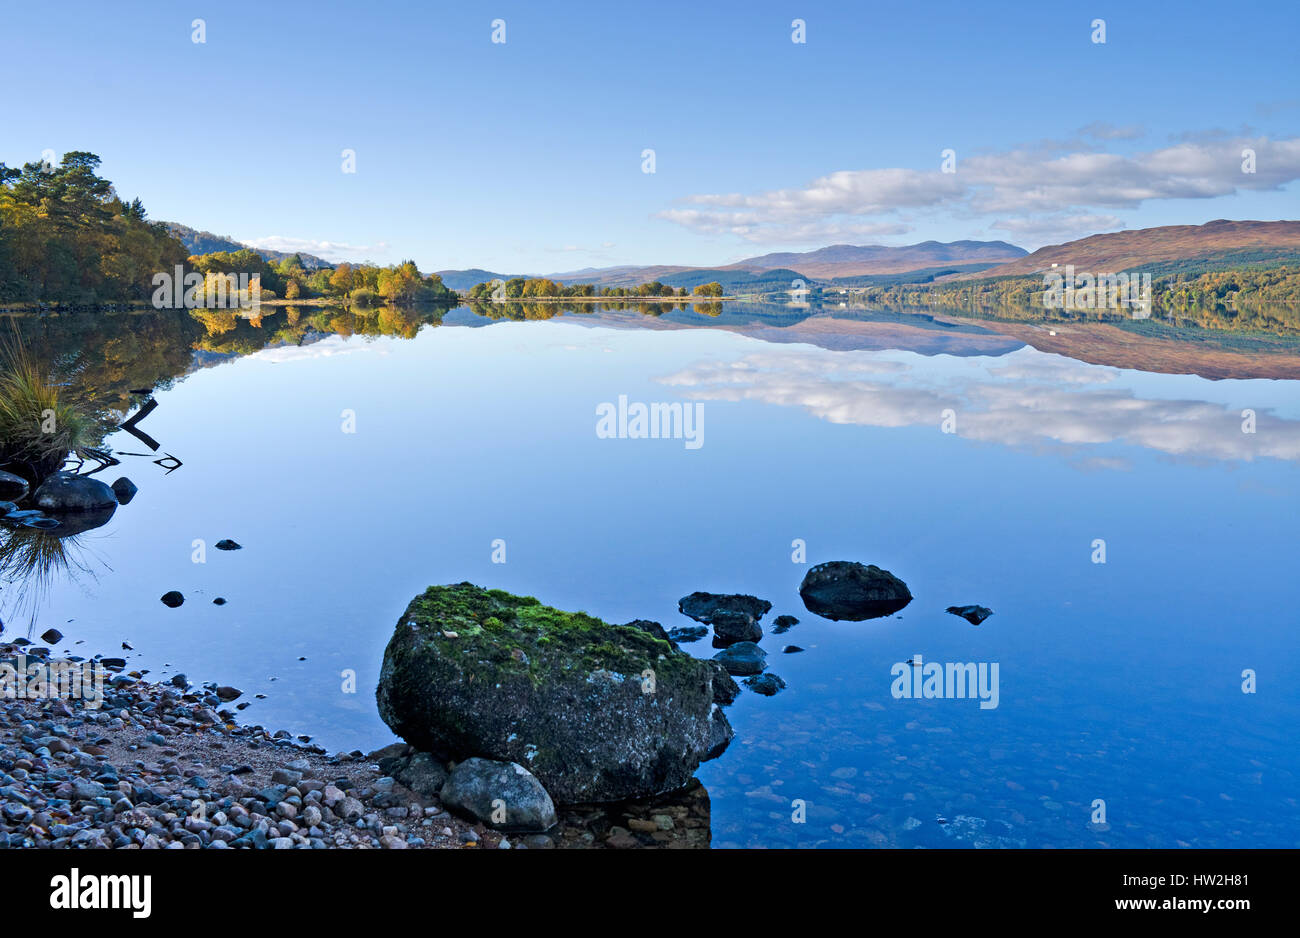 View over the western end of Loch Rannoch, Highland Perthshire, hillsides and woodlands reflected in the calm water on a beautiful autumn day Stock Photo